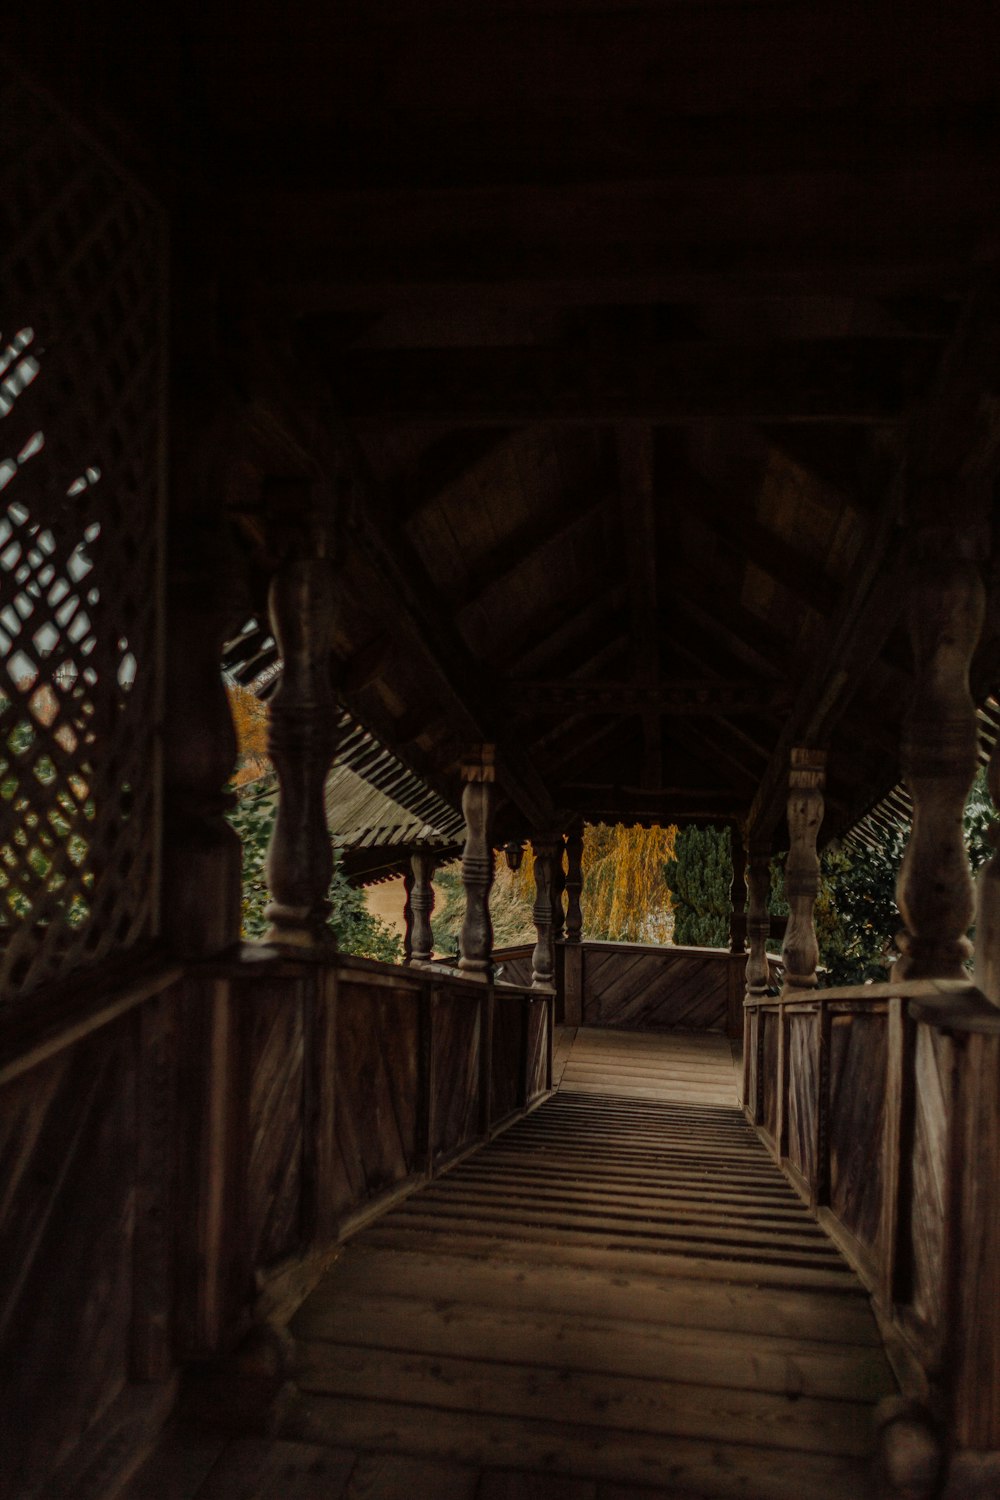 a wooden walkway leading to a covered area